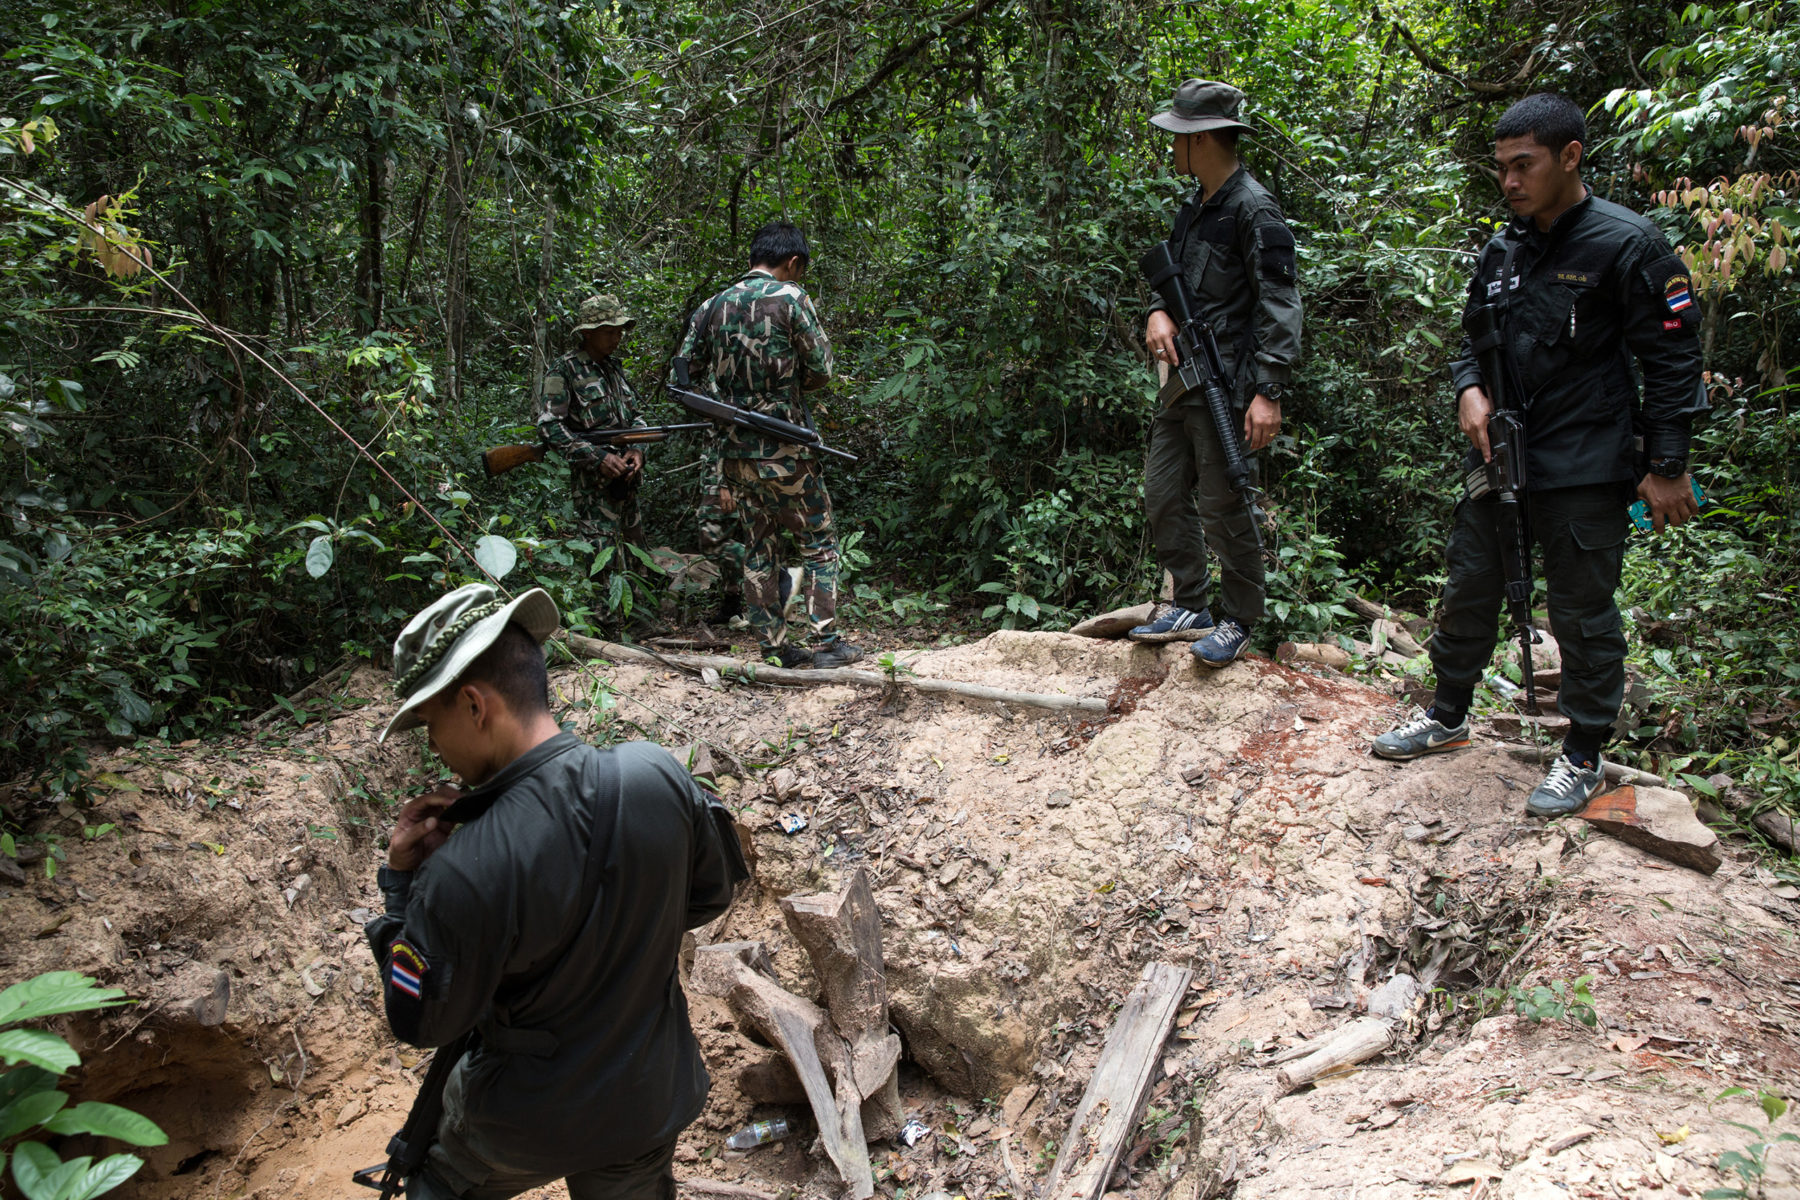 Forest rangers working with the Thai border police discover the site of a felled rosewood. The wood has such value that even the roots have been dug out. (Image: Luke Duggleby)